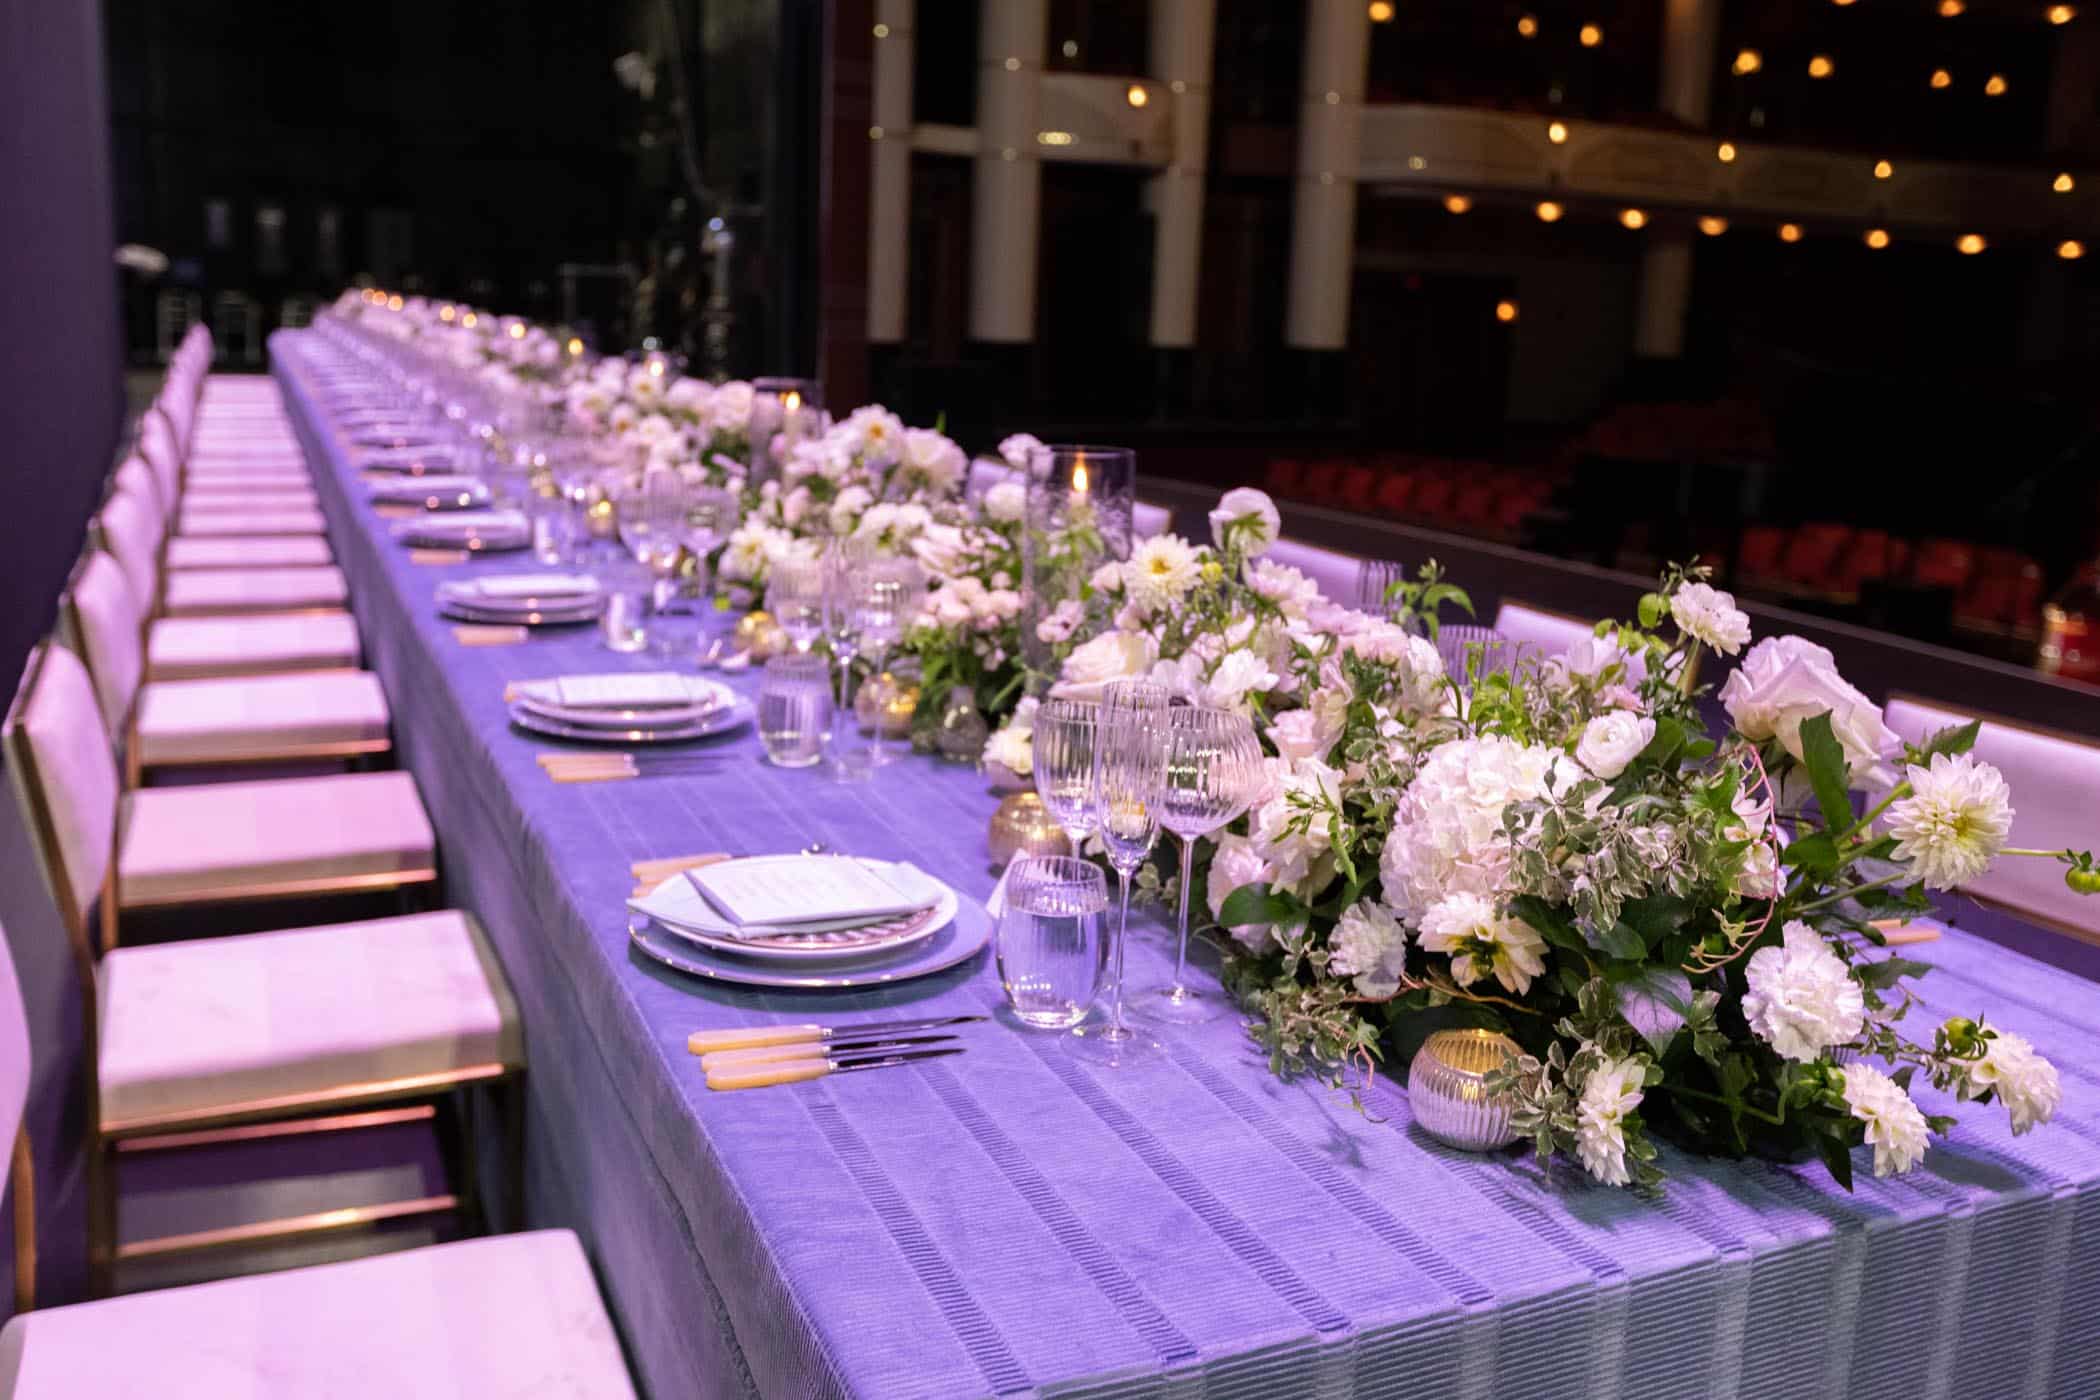 Table adorned with flowers and table settings with Dreyfoos Hall featured in background.